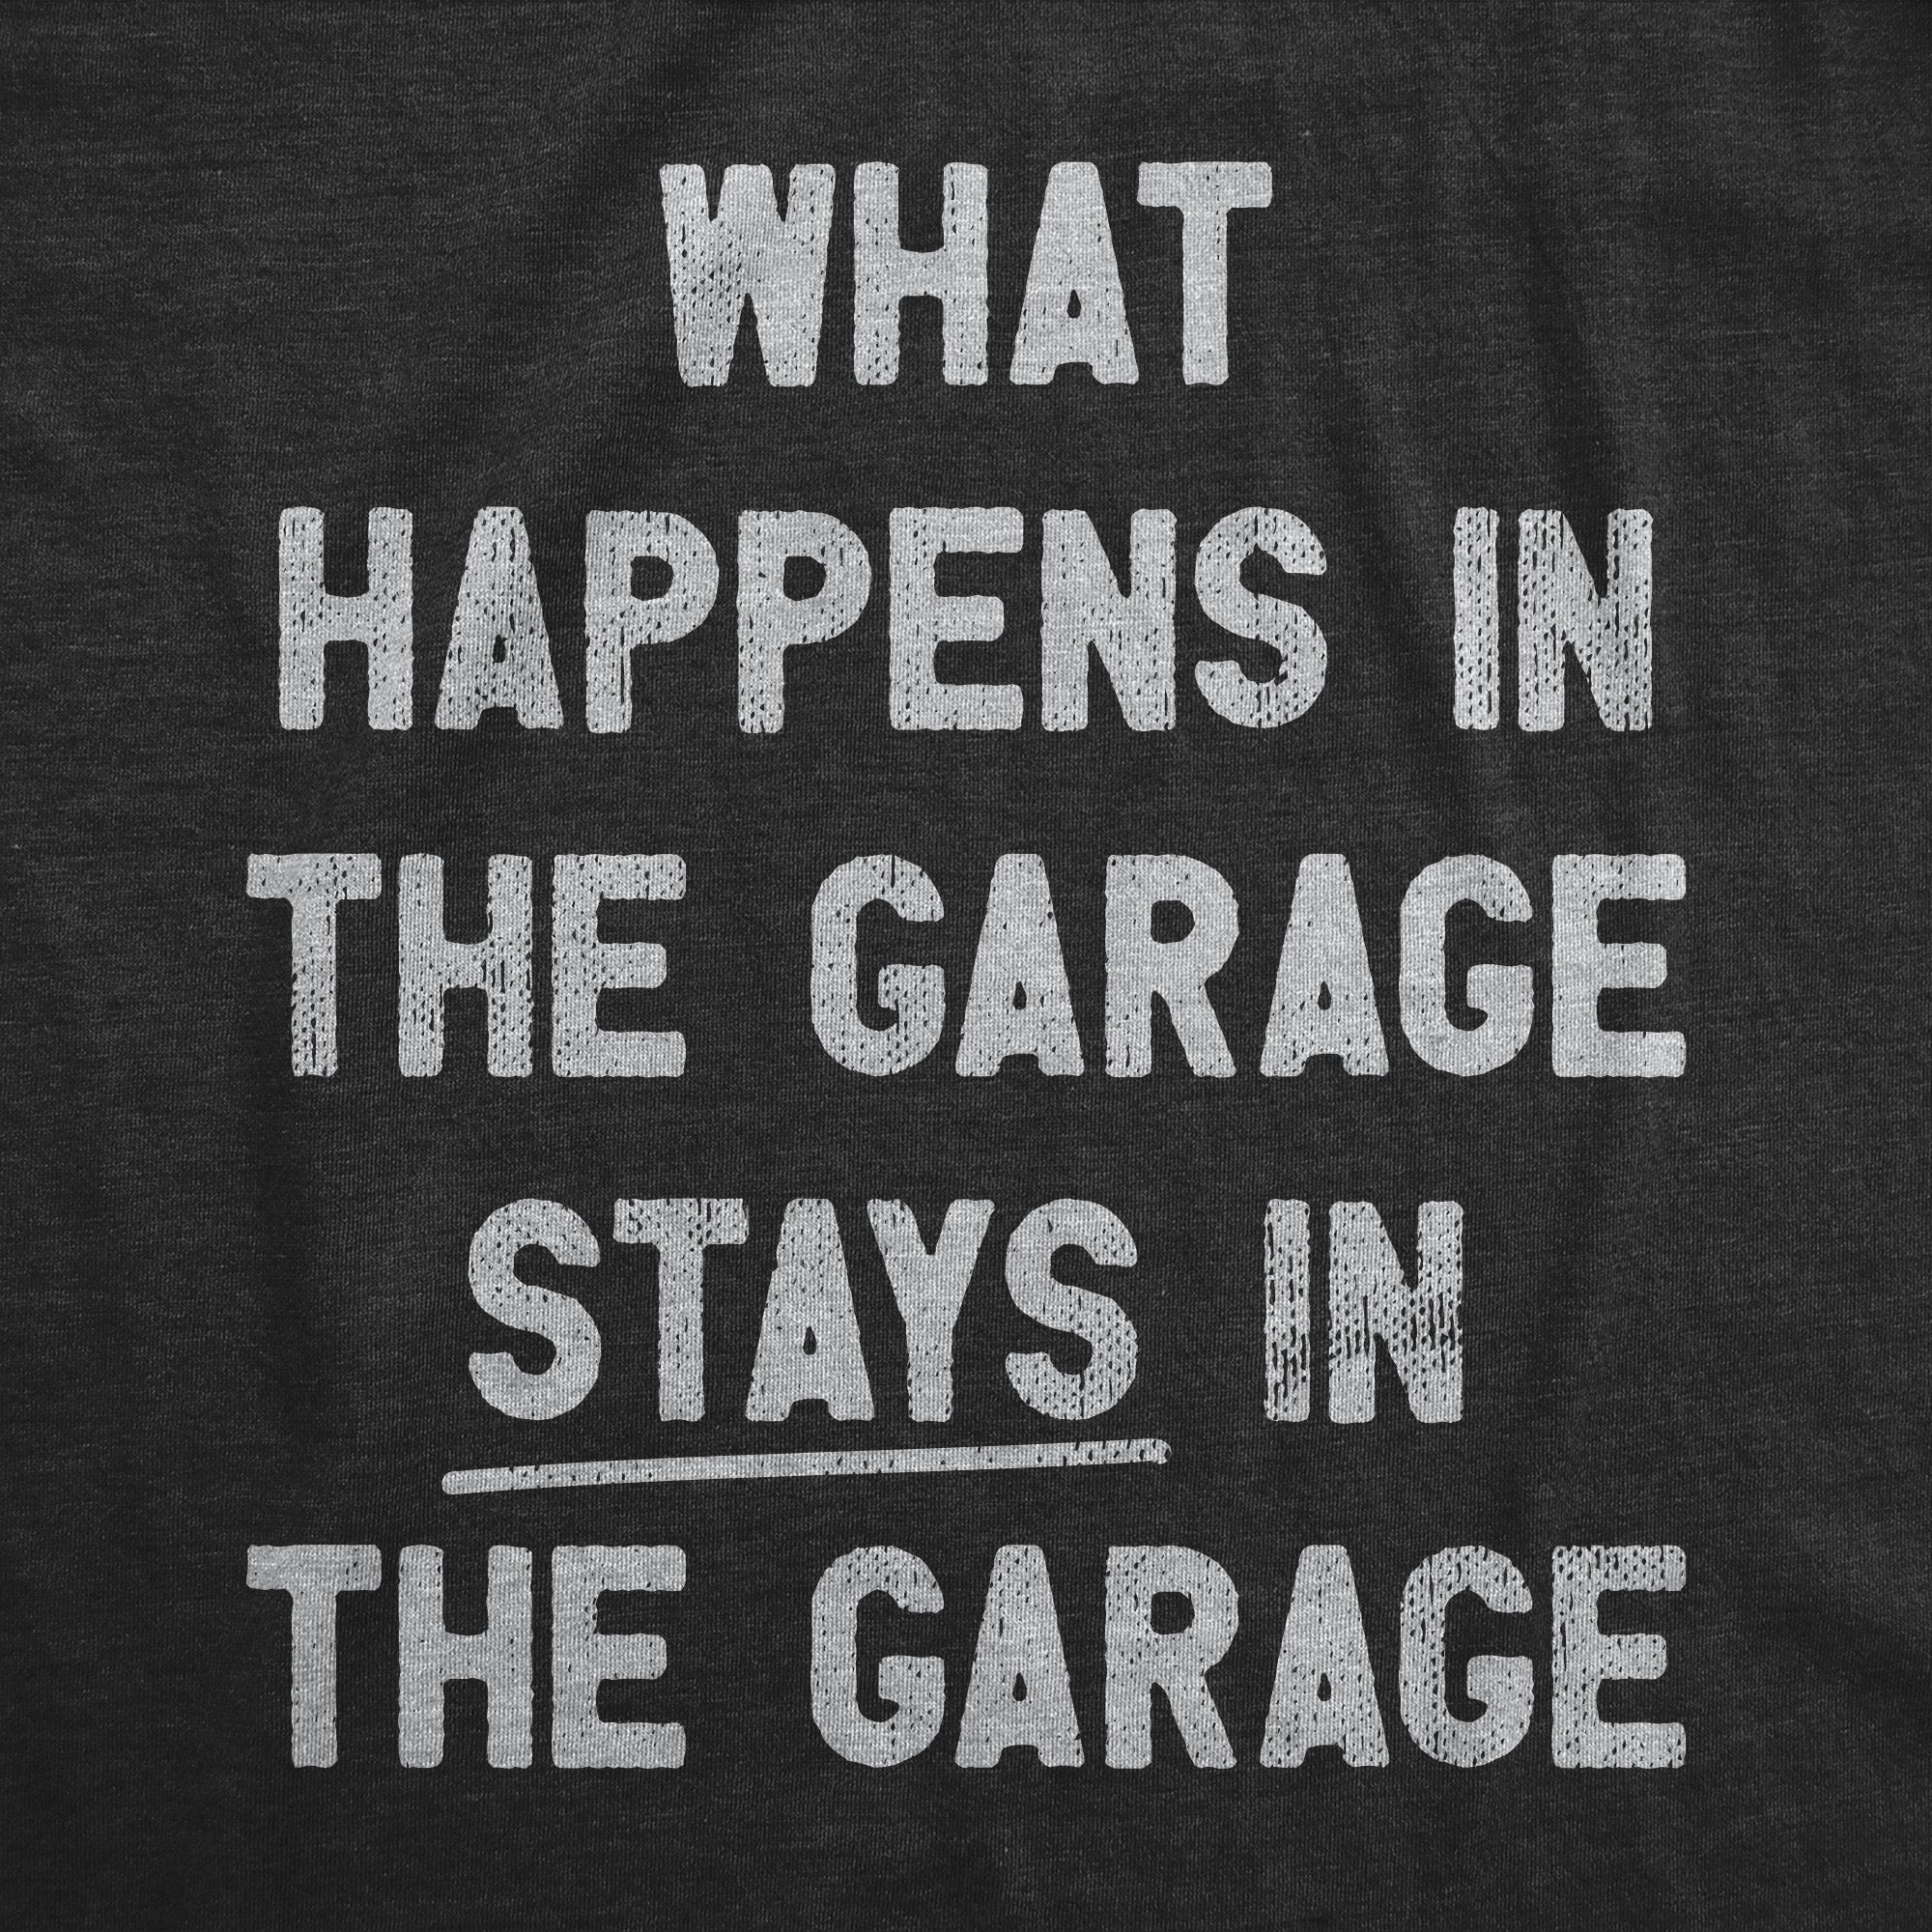 Funny Heather Black - GARAGE What Happens In The Garage Stays In The Garage Mens T Shirt Nerdy mechanic sarcastic Tee